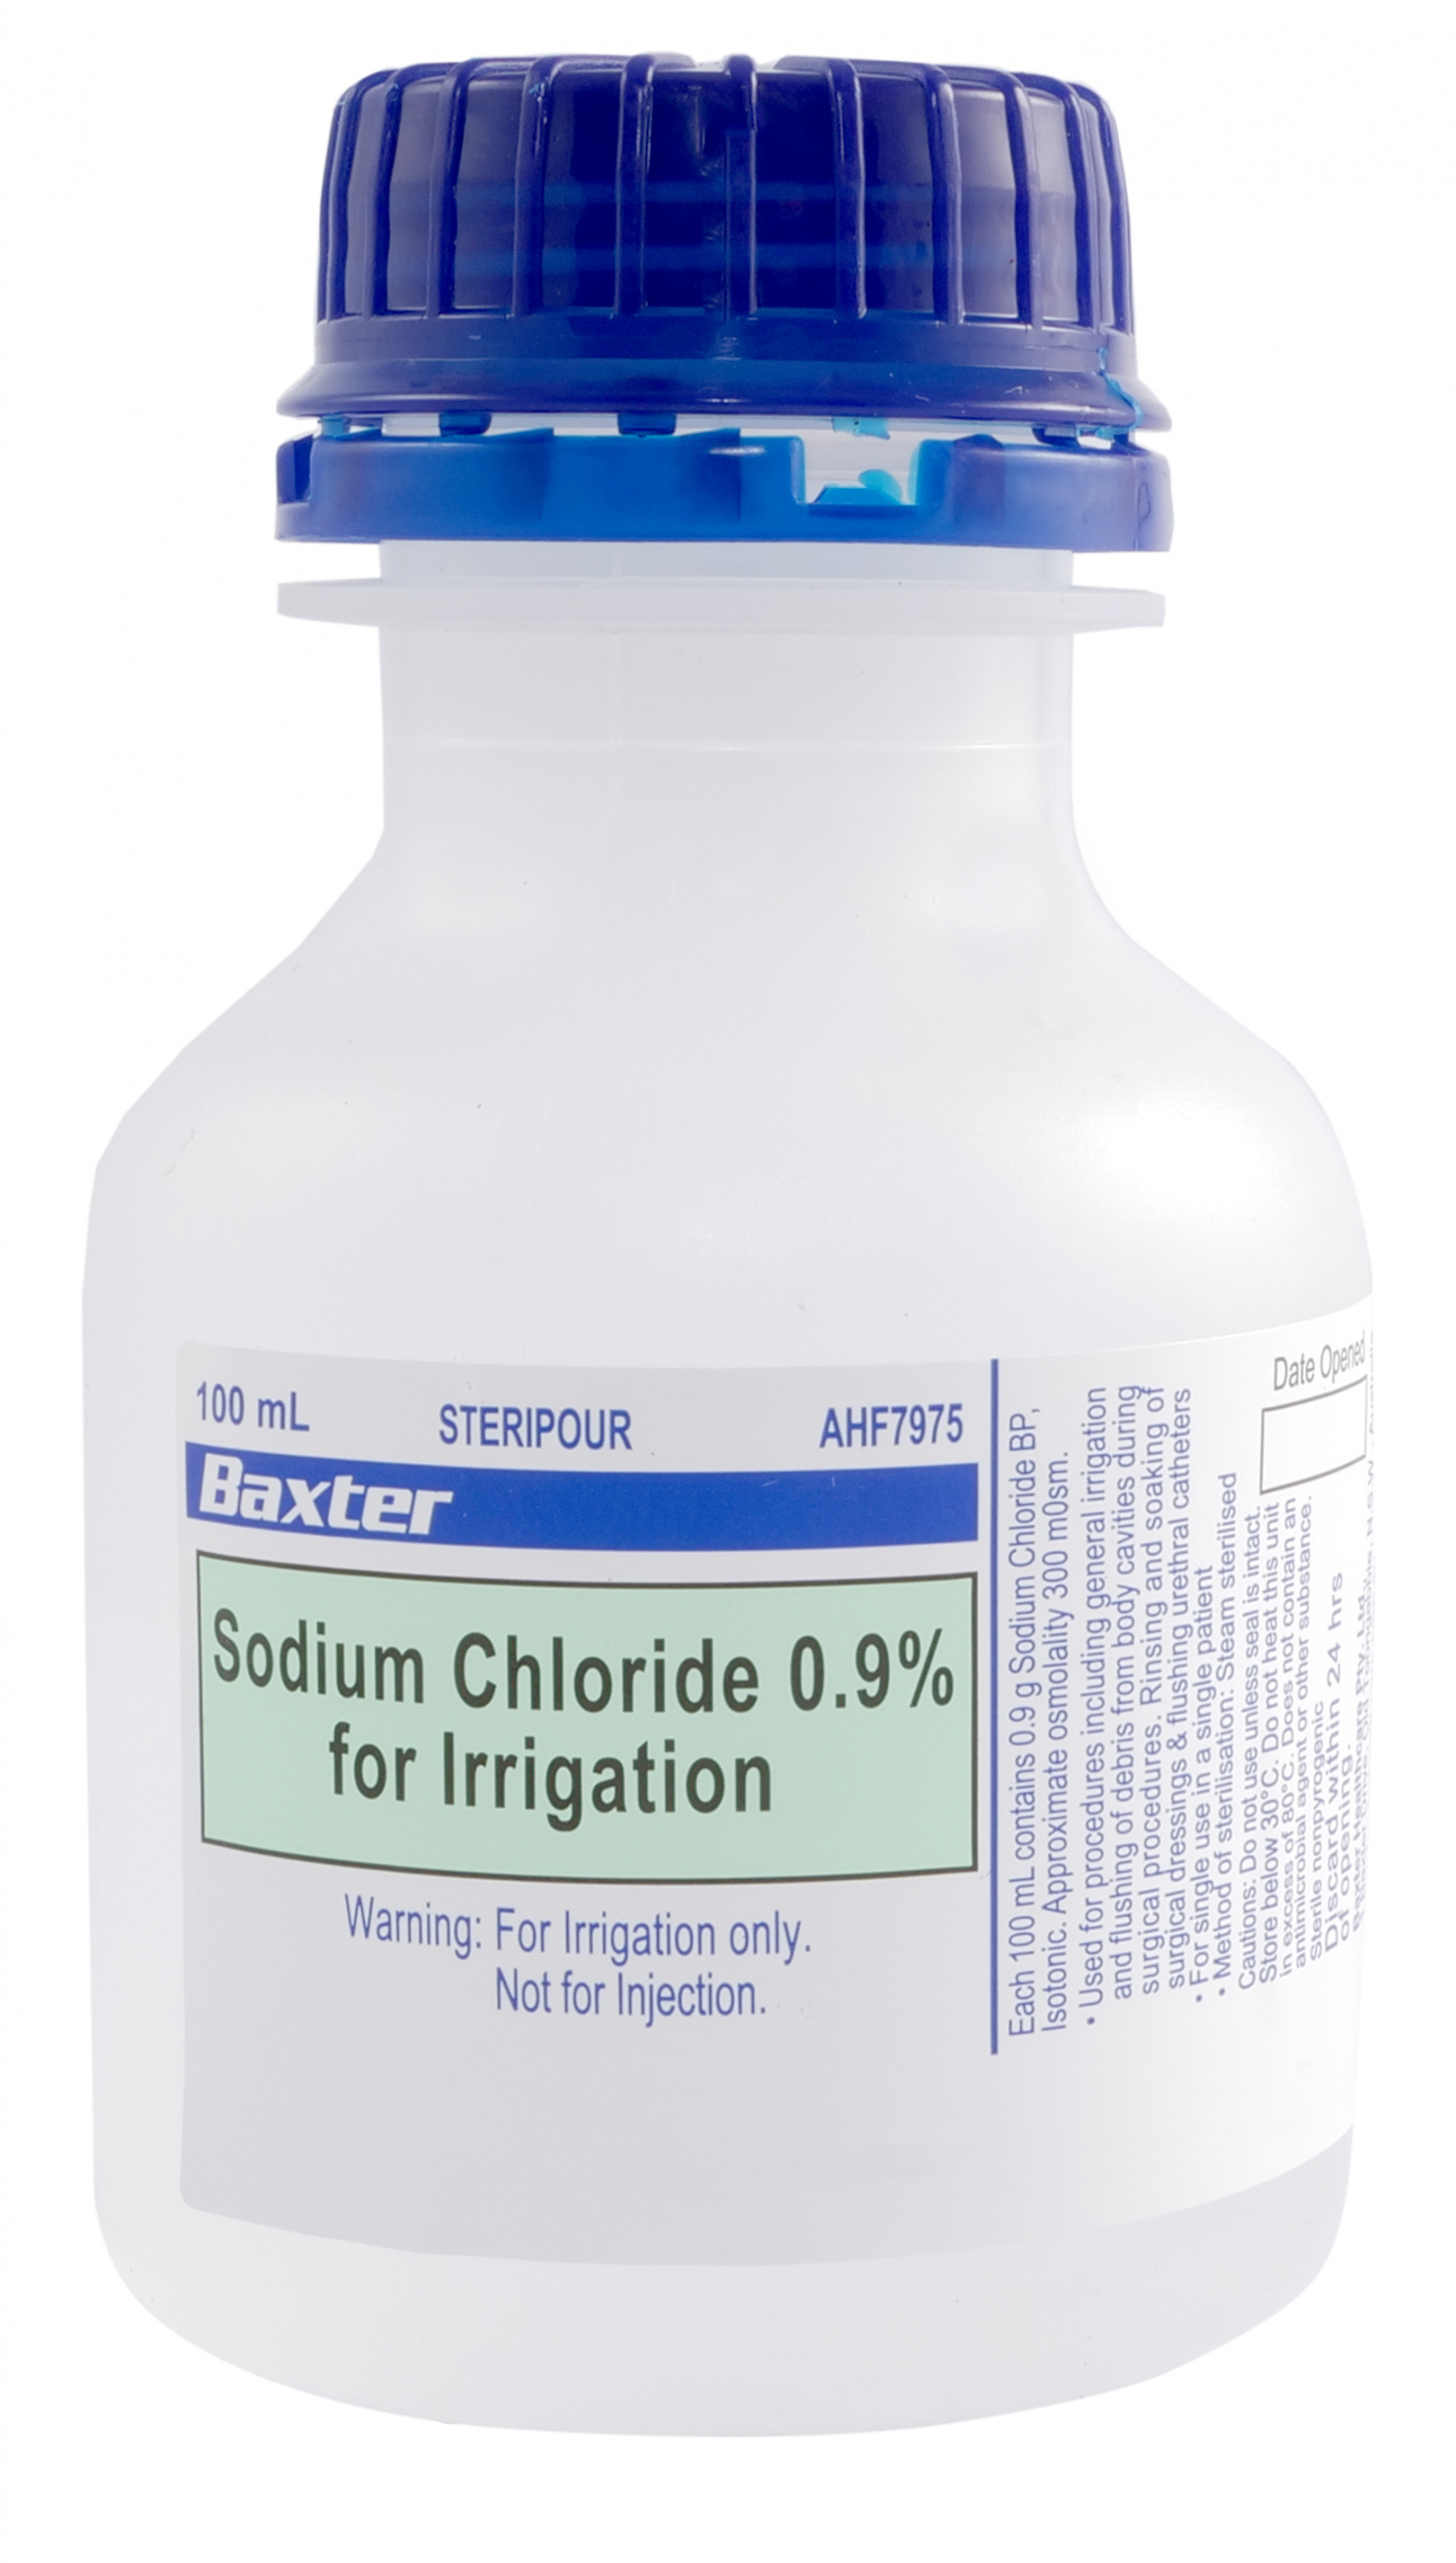 Sodium Chloride 0.9% Steripour Irrigation 100mls